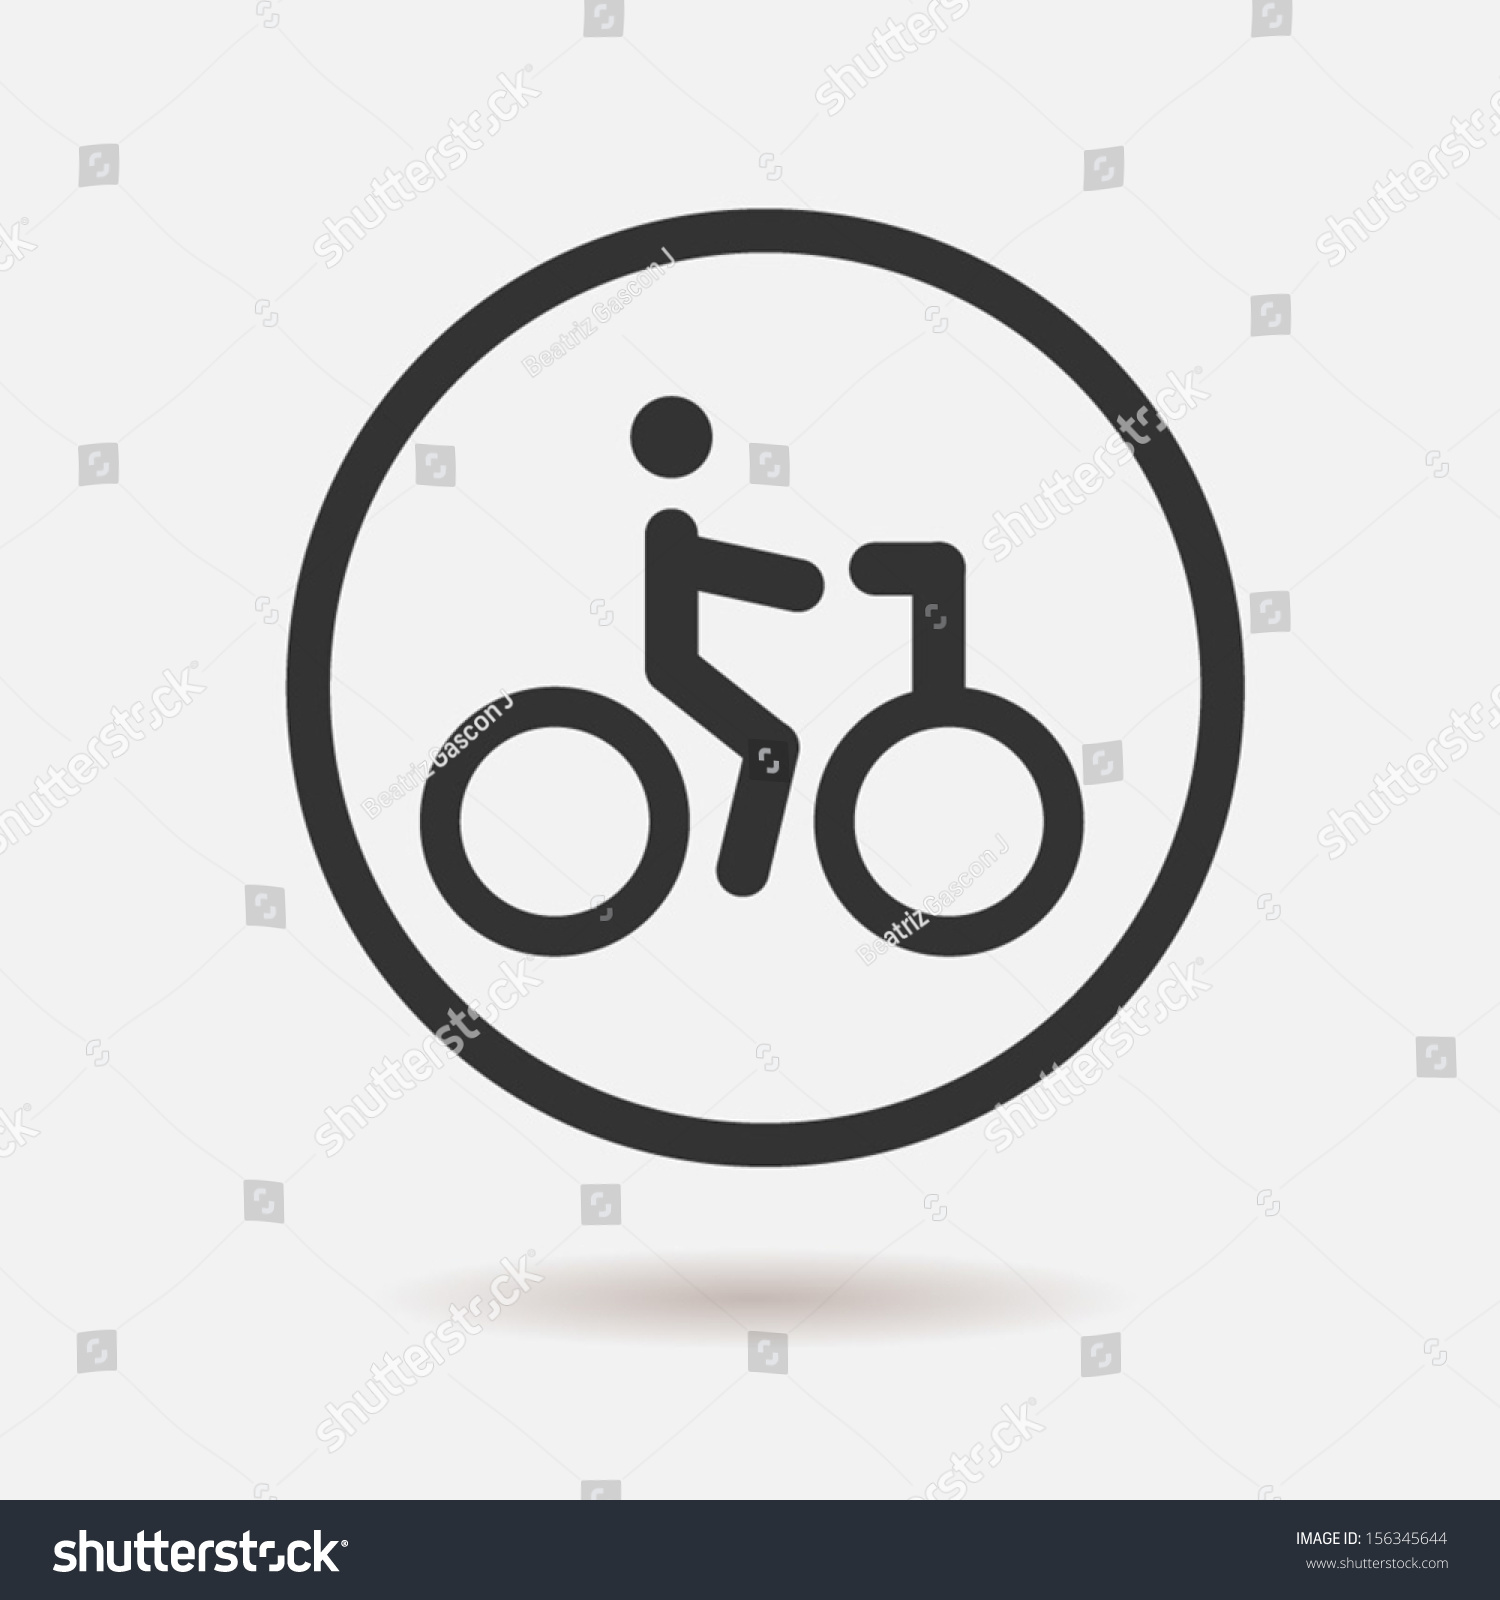 Bicycle Icons Stock Vector Illustration 156345644 : Shutterstock